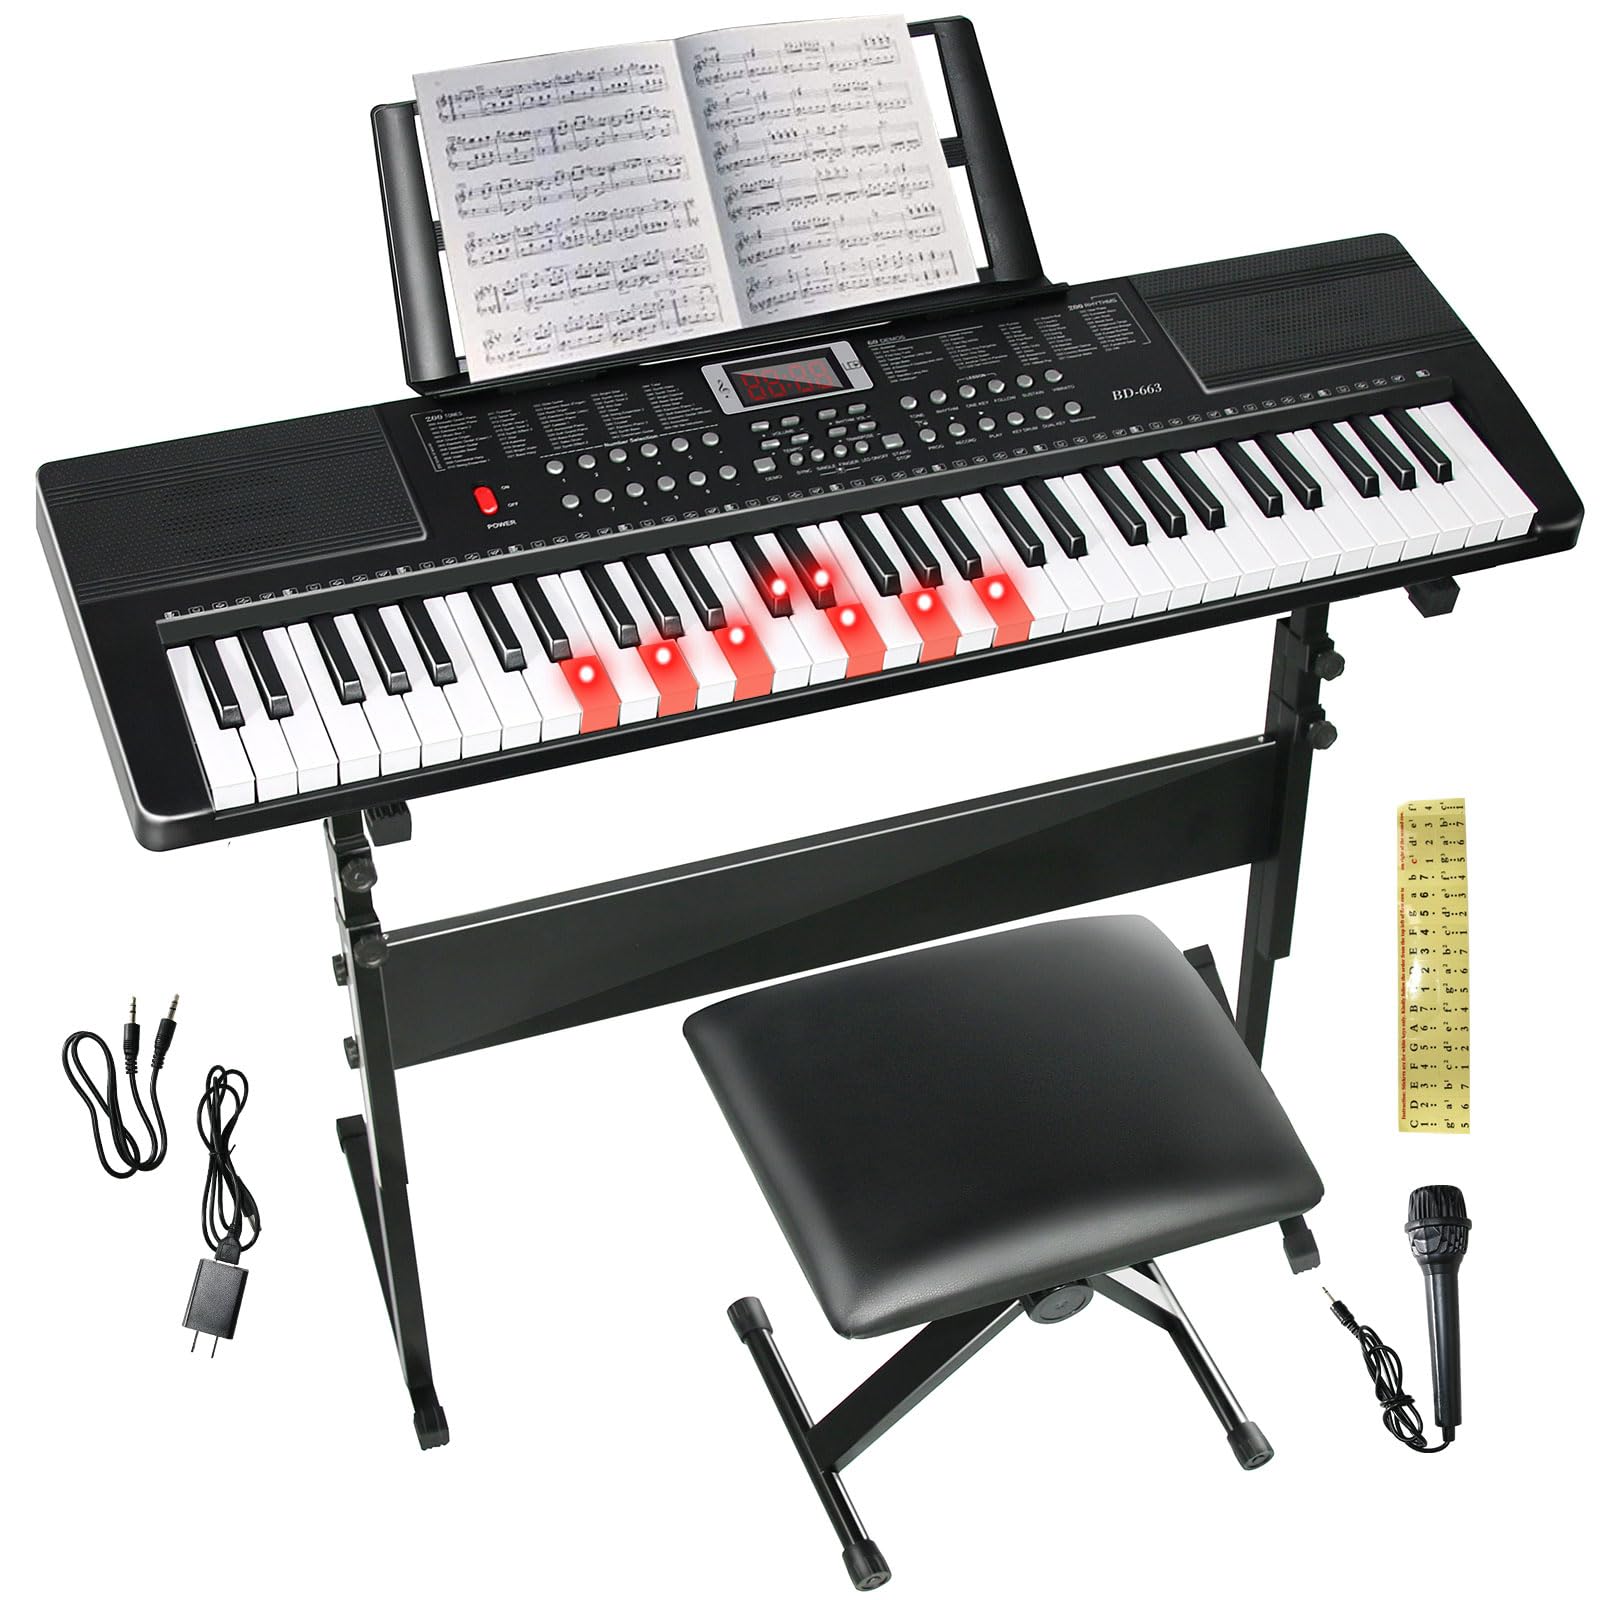 Keyboard Piano 61 Key Electric Piano Keyboard for BeginnersProfessional Portable Light Up Music Keyboard Built-in Dual Spea